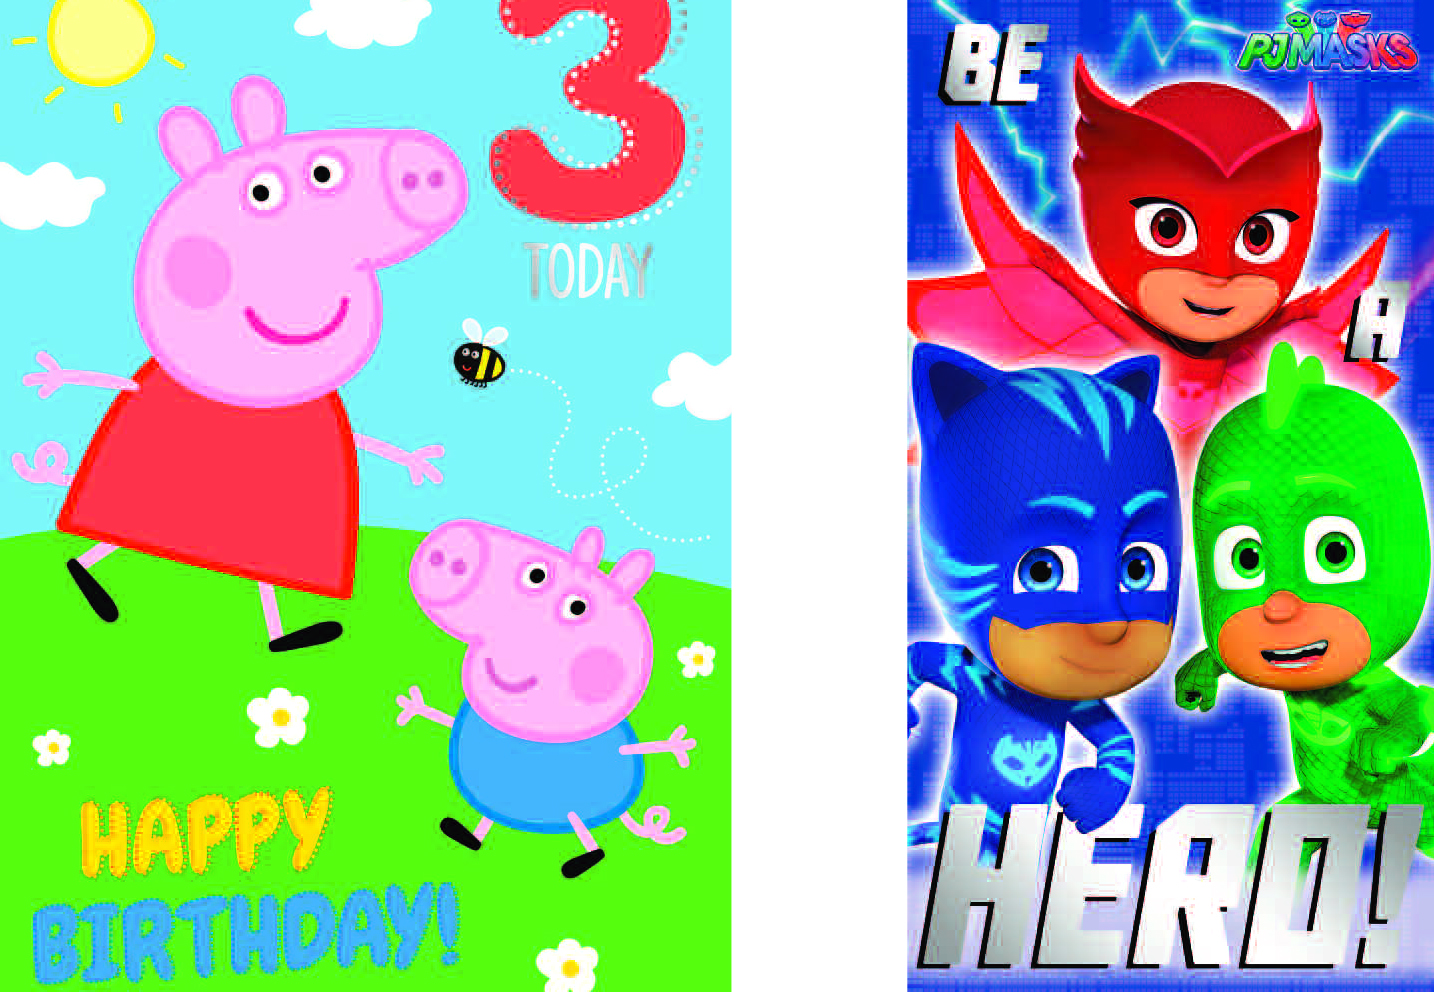 Above: The first Peppa card design that has been developed by Danilo. It will also be carrying some former Gemma cards (such as this PJ Masks one) to provide customers with supply.